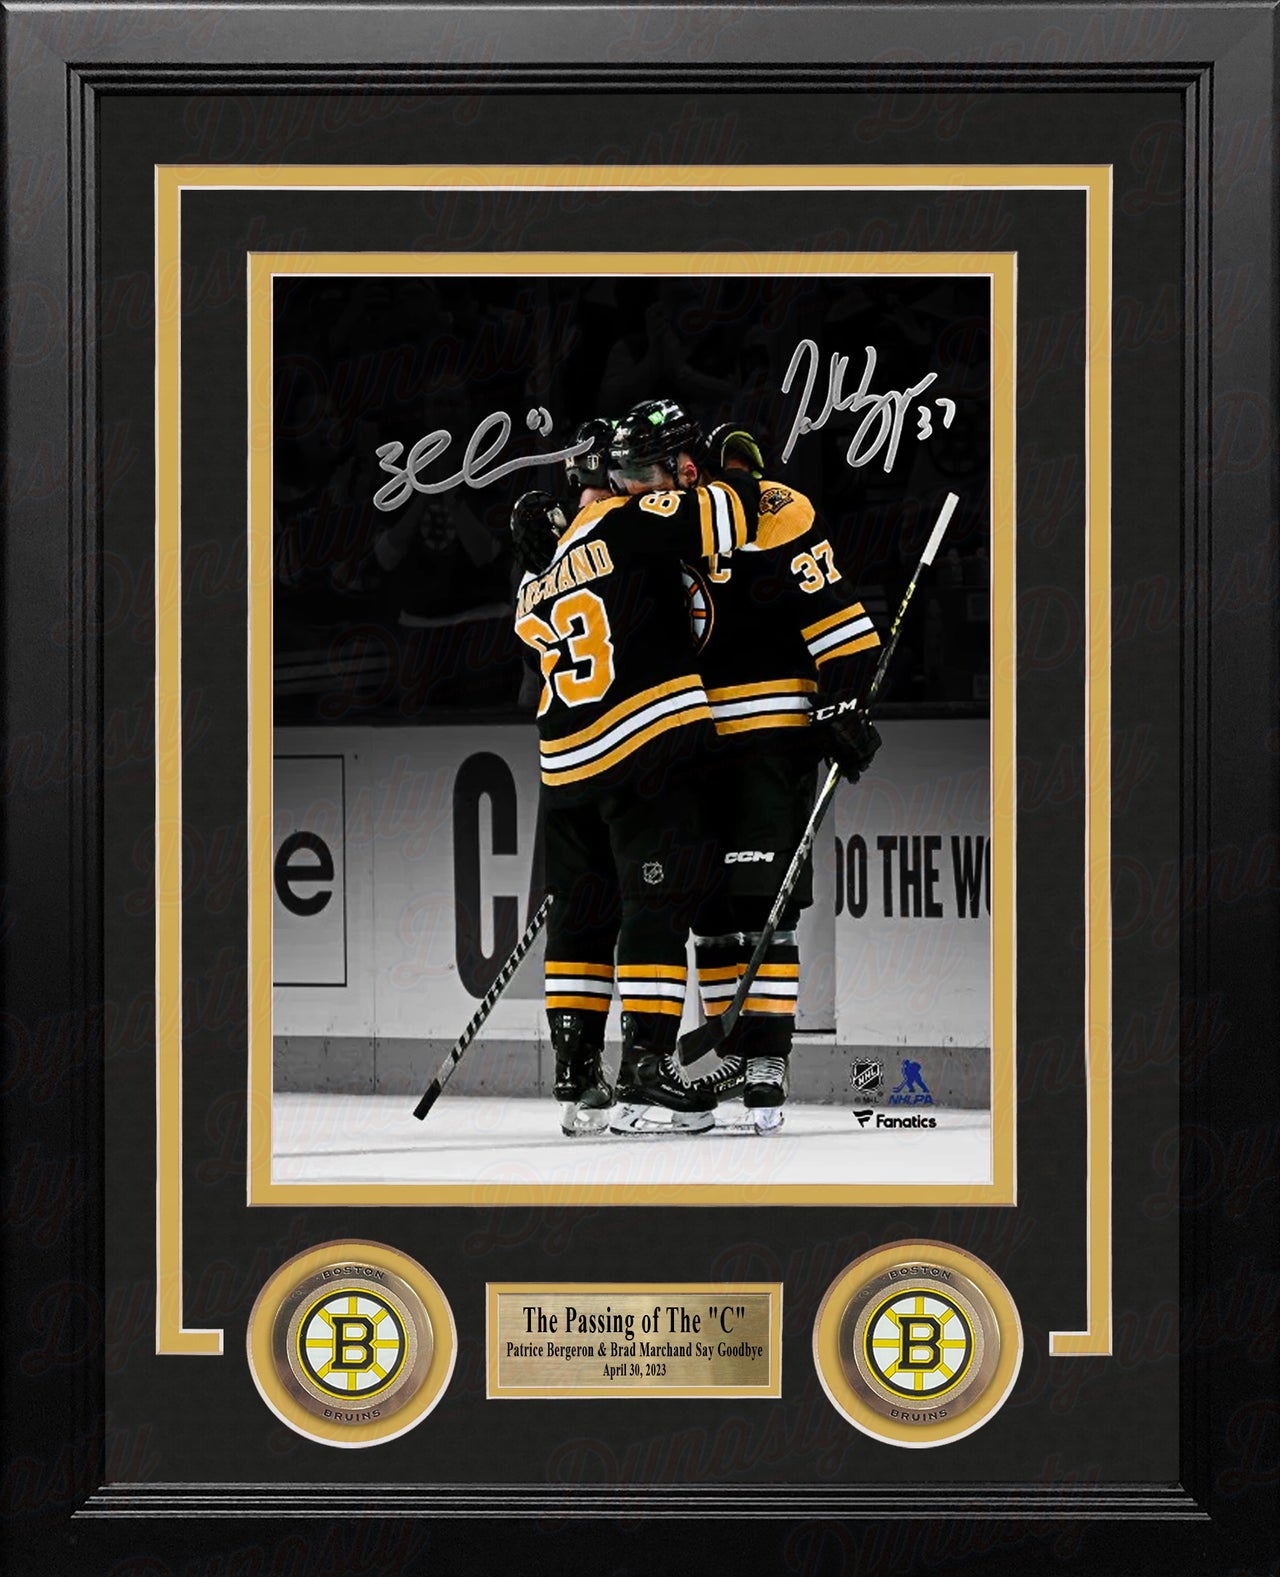 Patrice Bergeron & Brad Marchand Final Game Hug Boston Bruins Autographed 8" x 10" Framed Photo